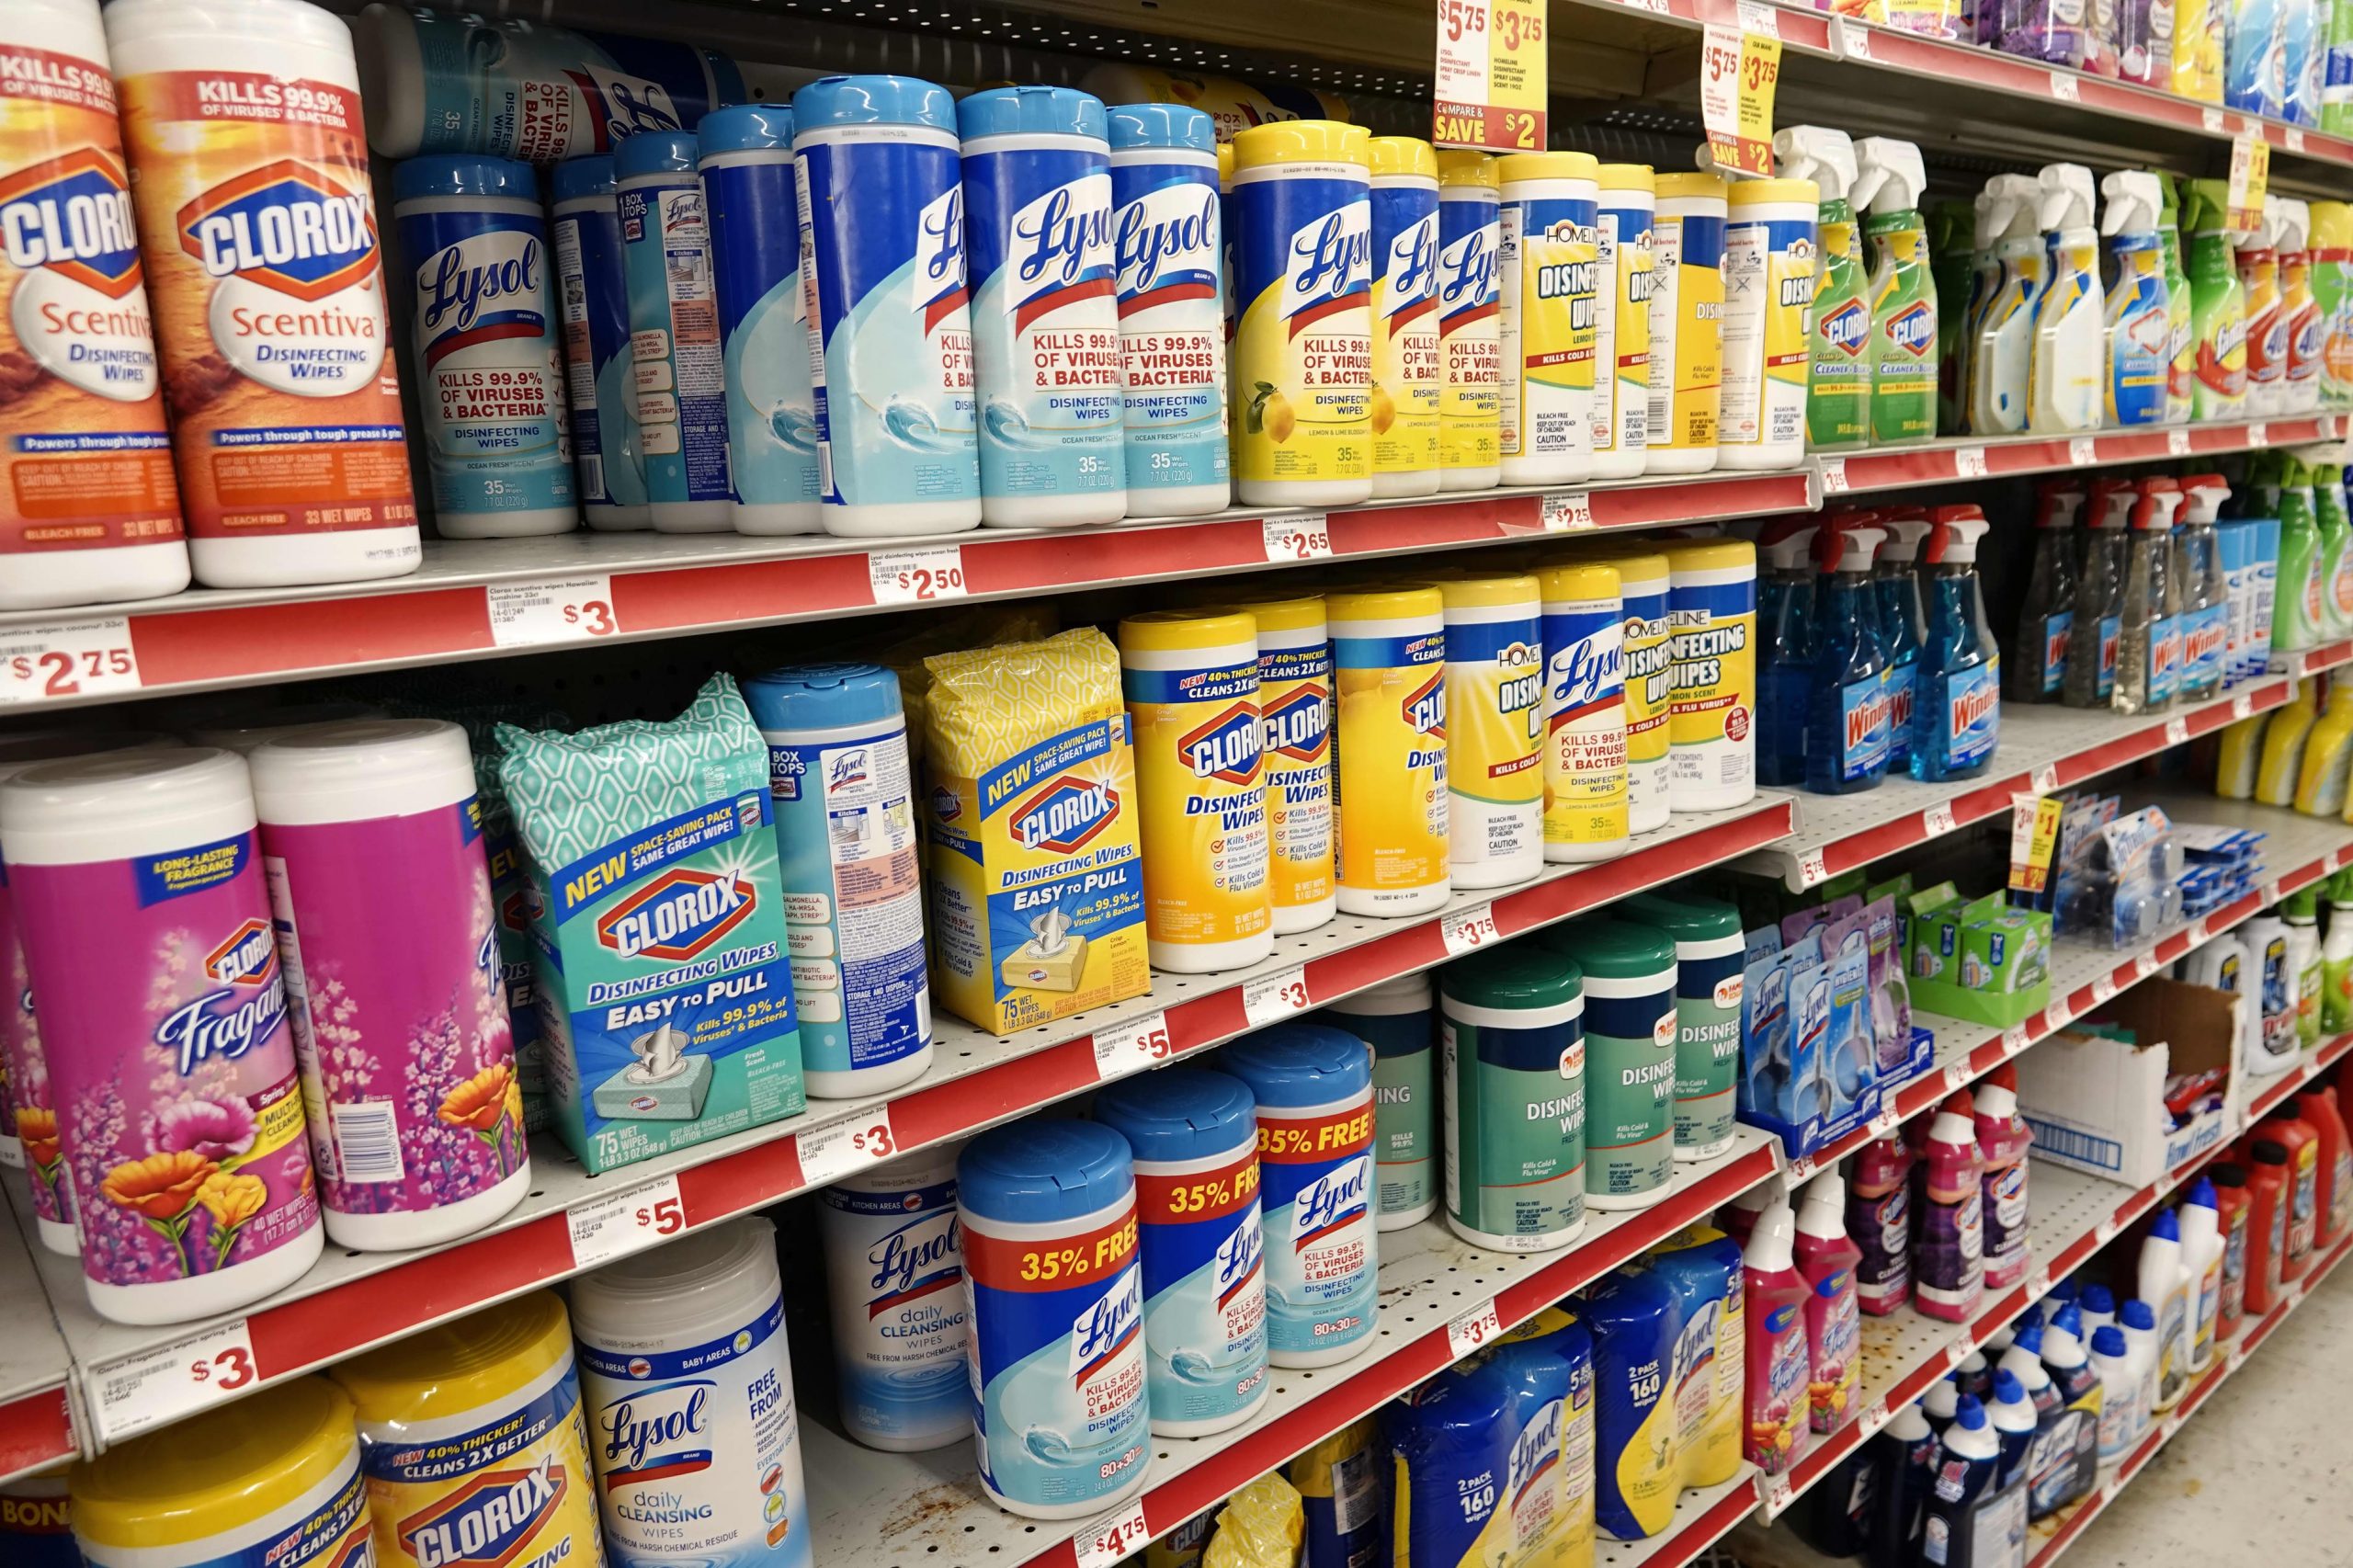 Clorox increasing manufacturing of disinfectant wipes amid Covid: CEO Linda Rendle